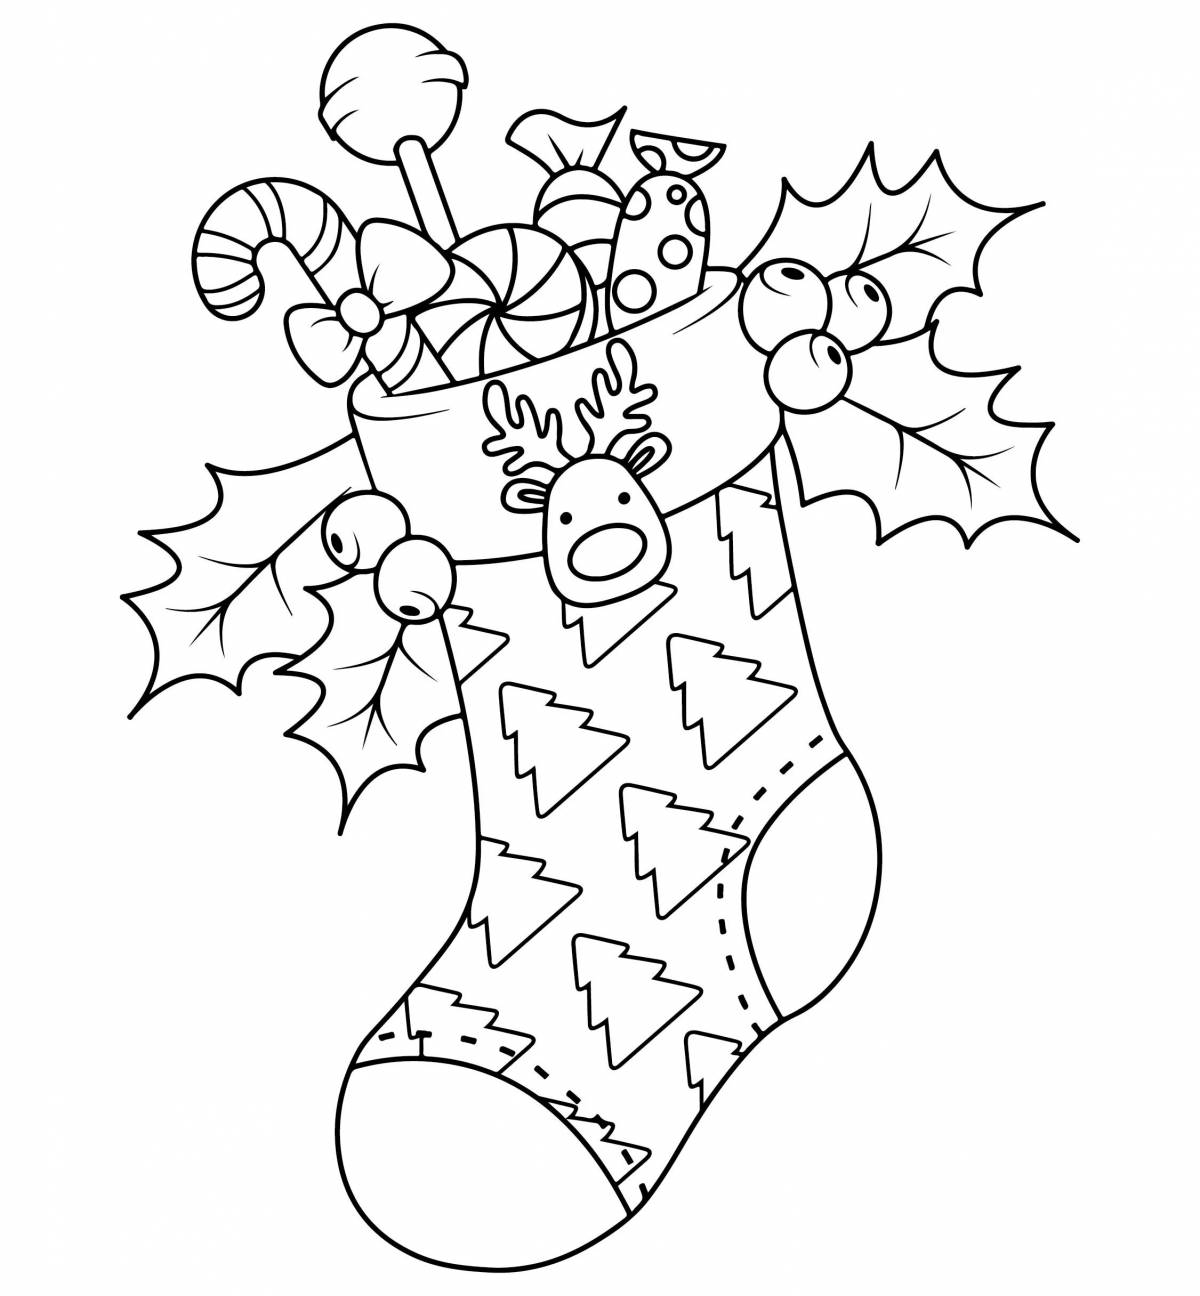 Coloring book bold stocking